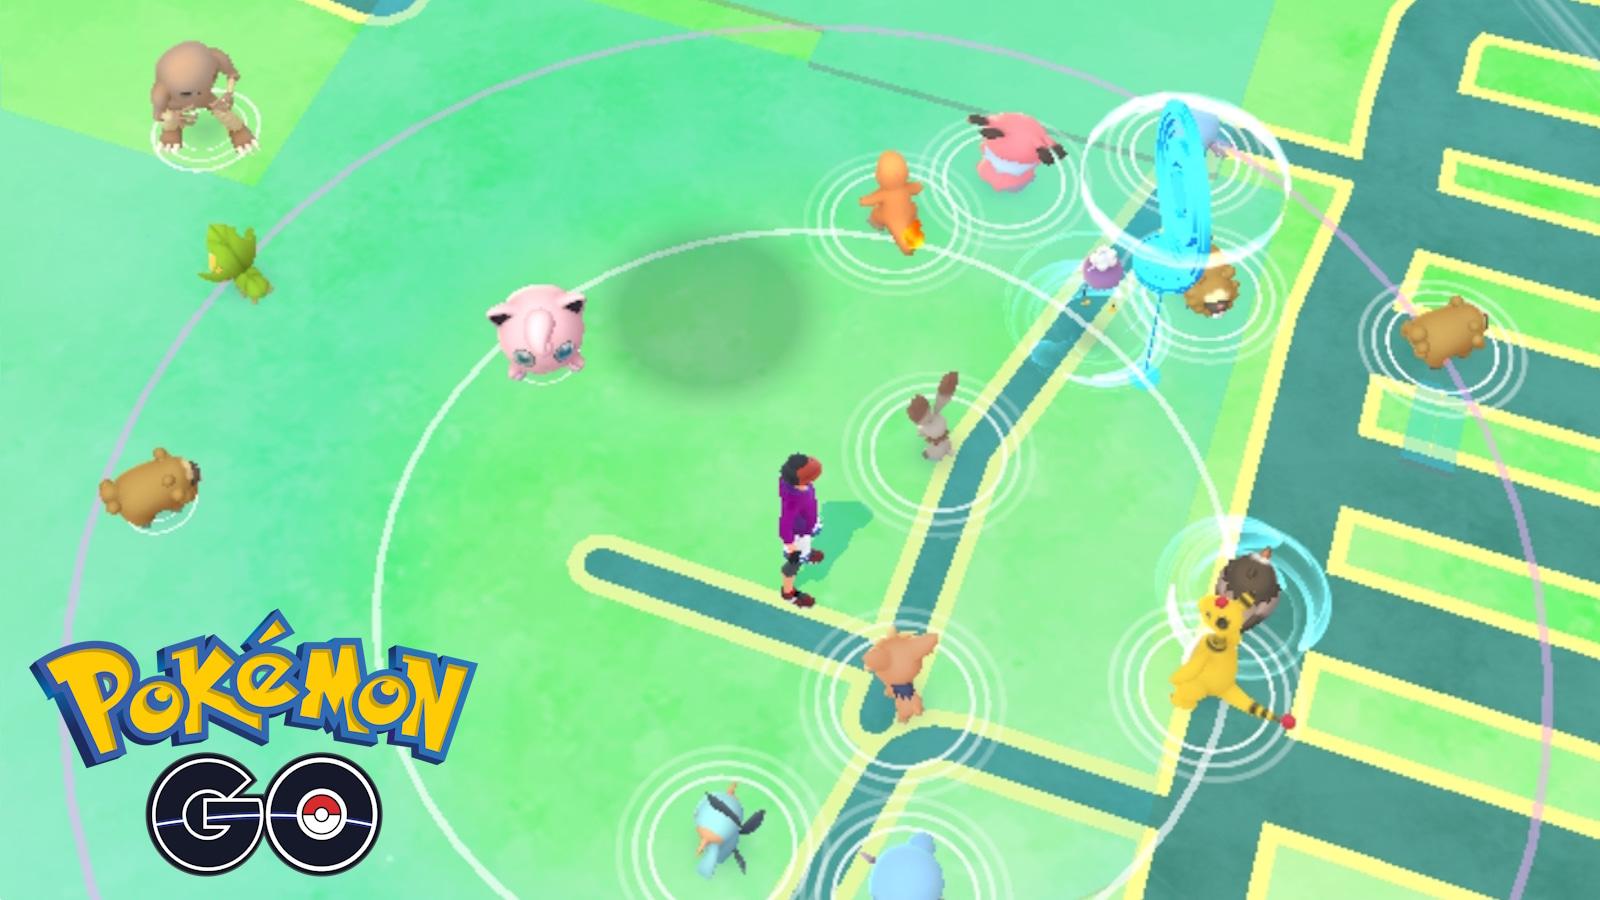 High-res image of Pokemon Go spawn rate distance increased after update.